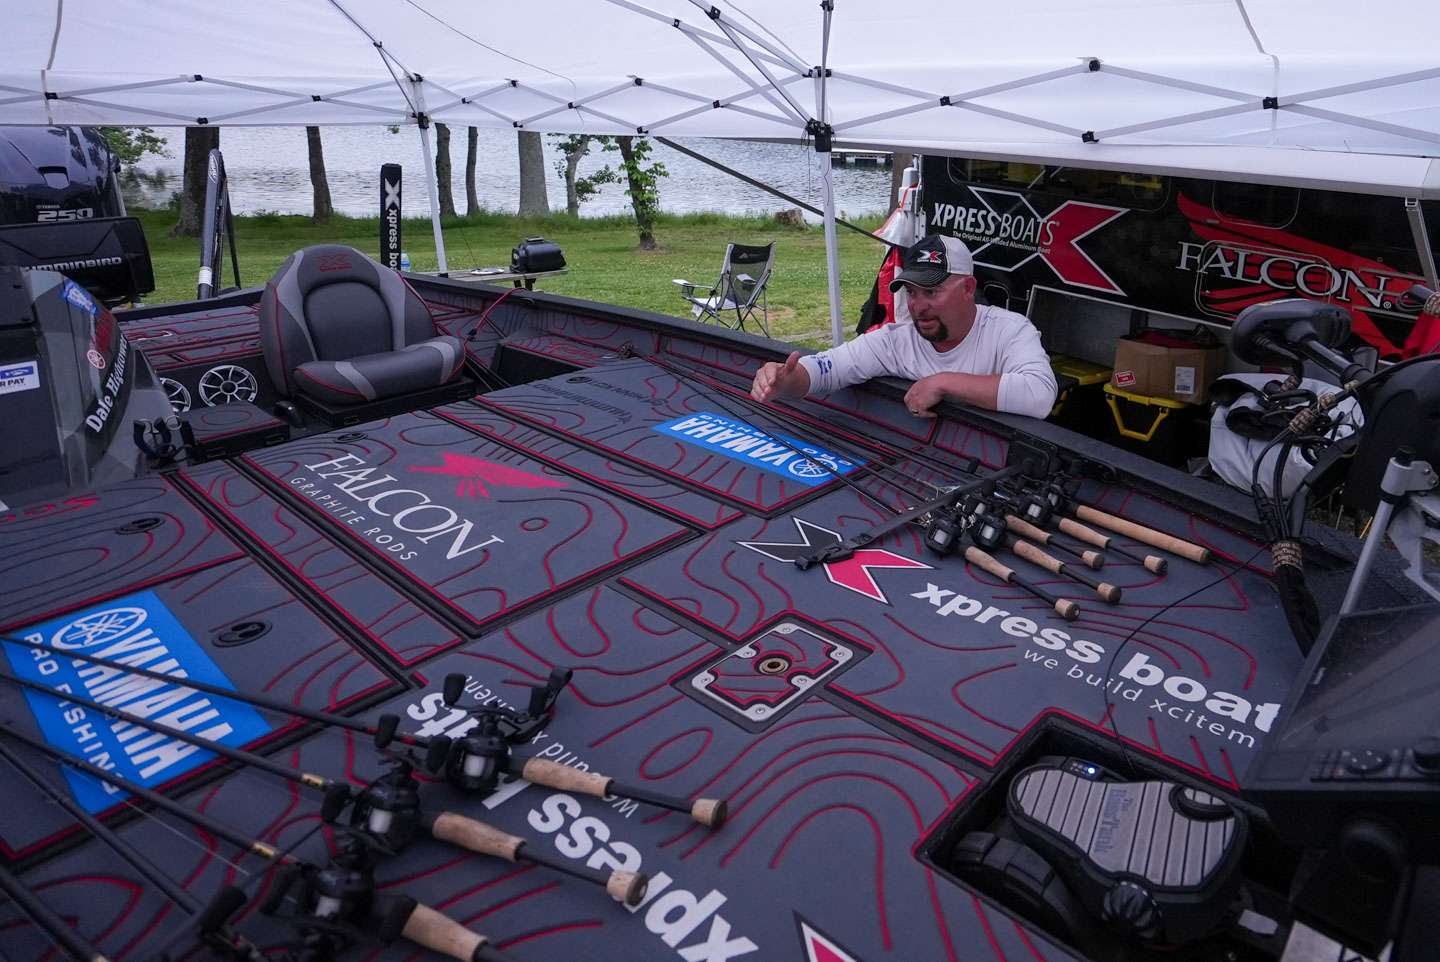 One consistent theme is the amount of rods each angler has rigged up. Hightower narrowed it down to two baits he believes he will rely on during the tournament. 